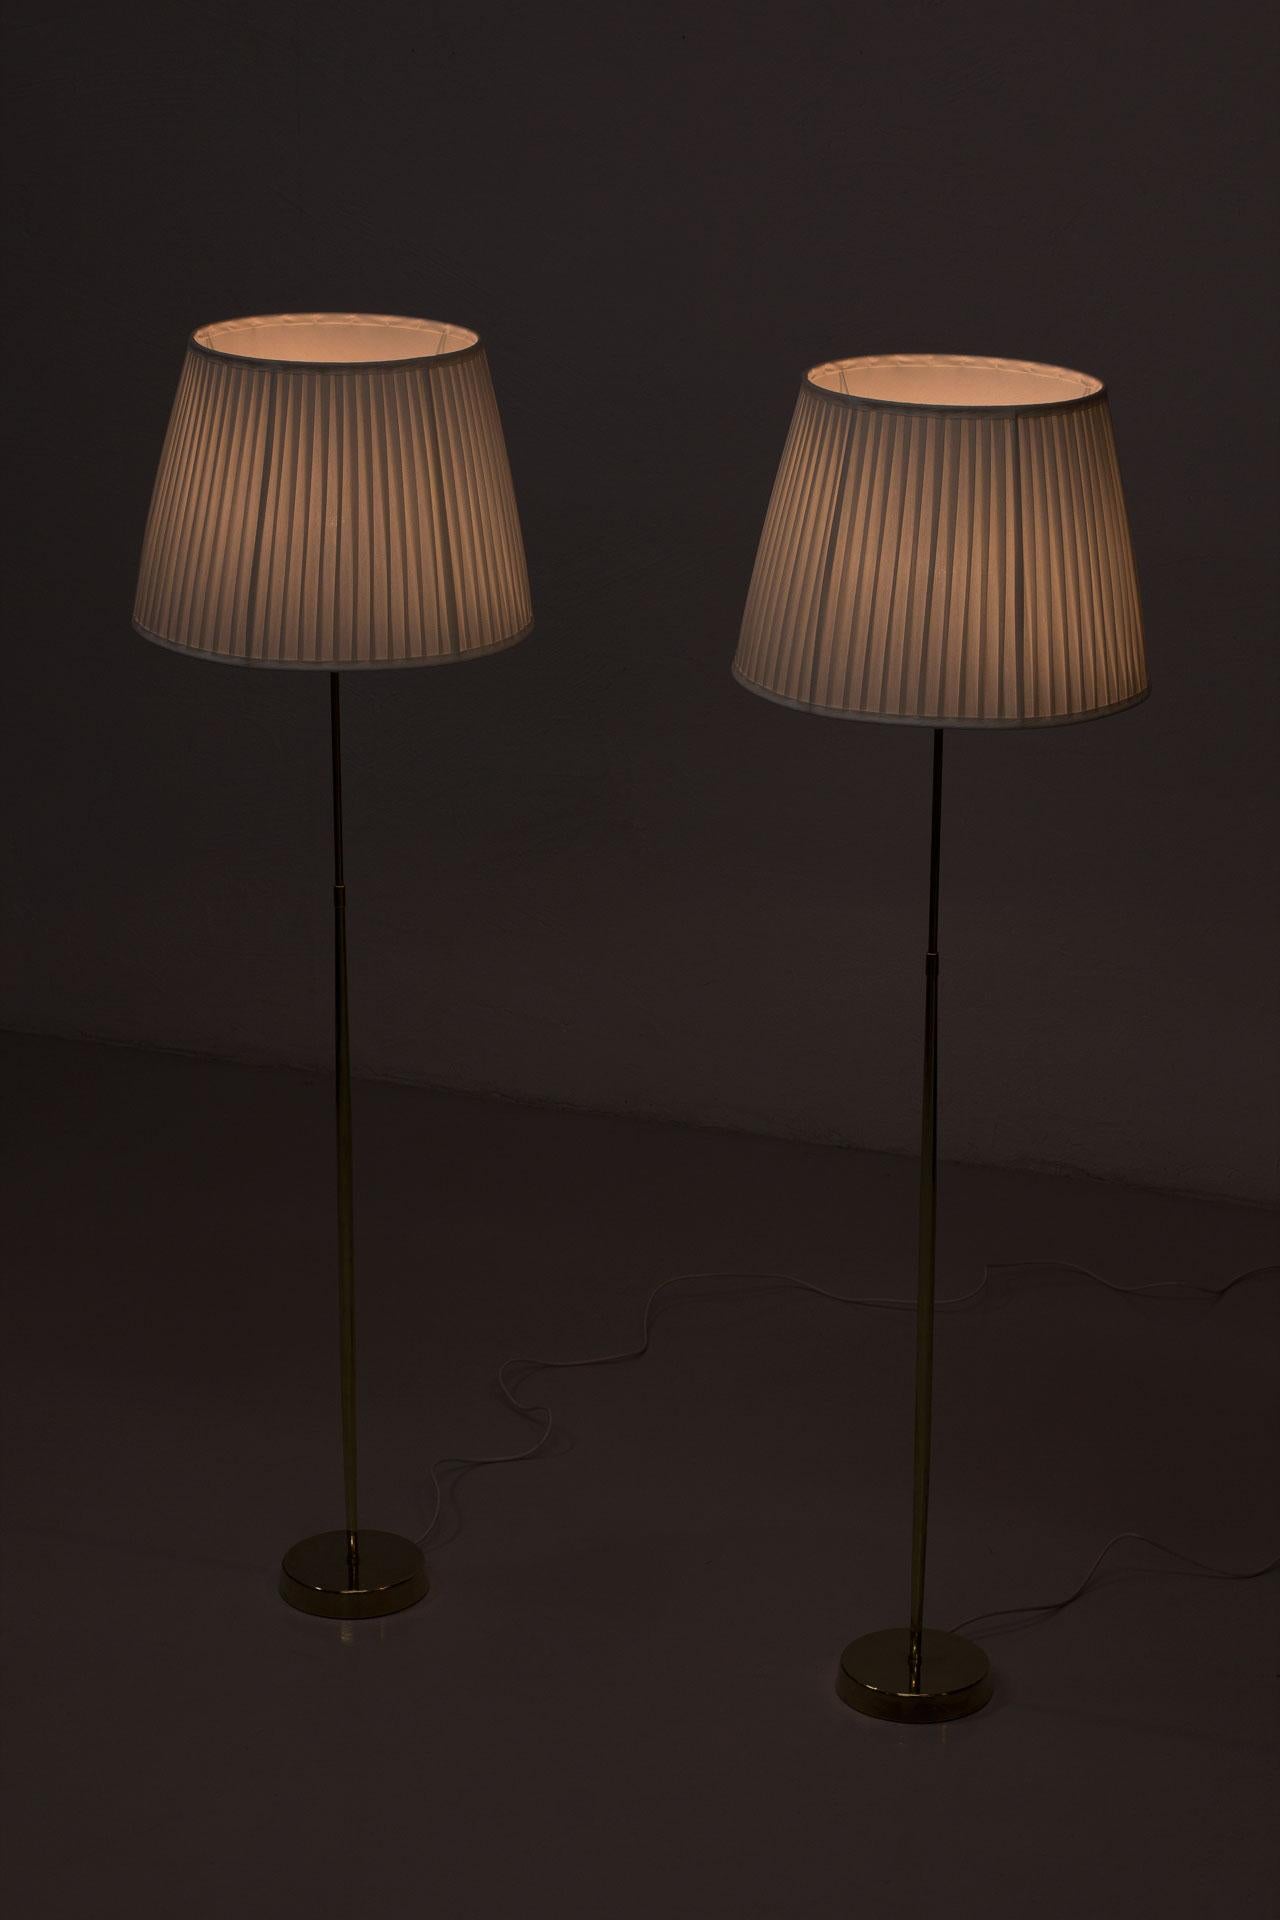 20th Century Pair of ASEA Belysning Brass Floor Lamps, 1950s, Hand-Pleated Chintz Shades For Sale